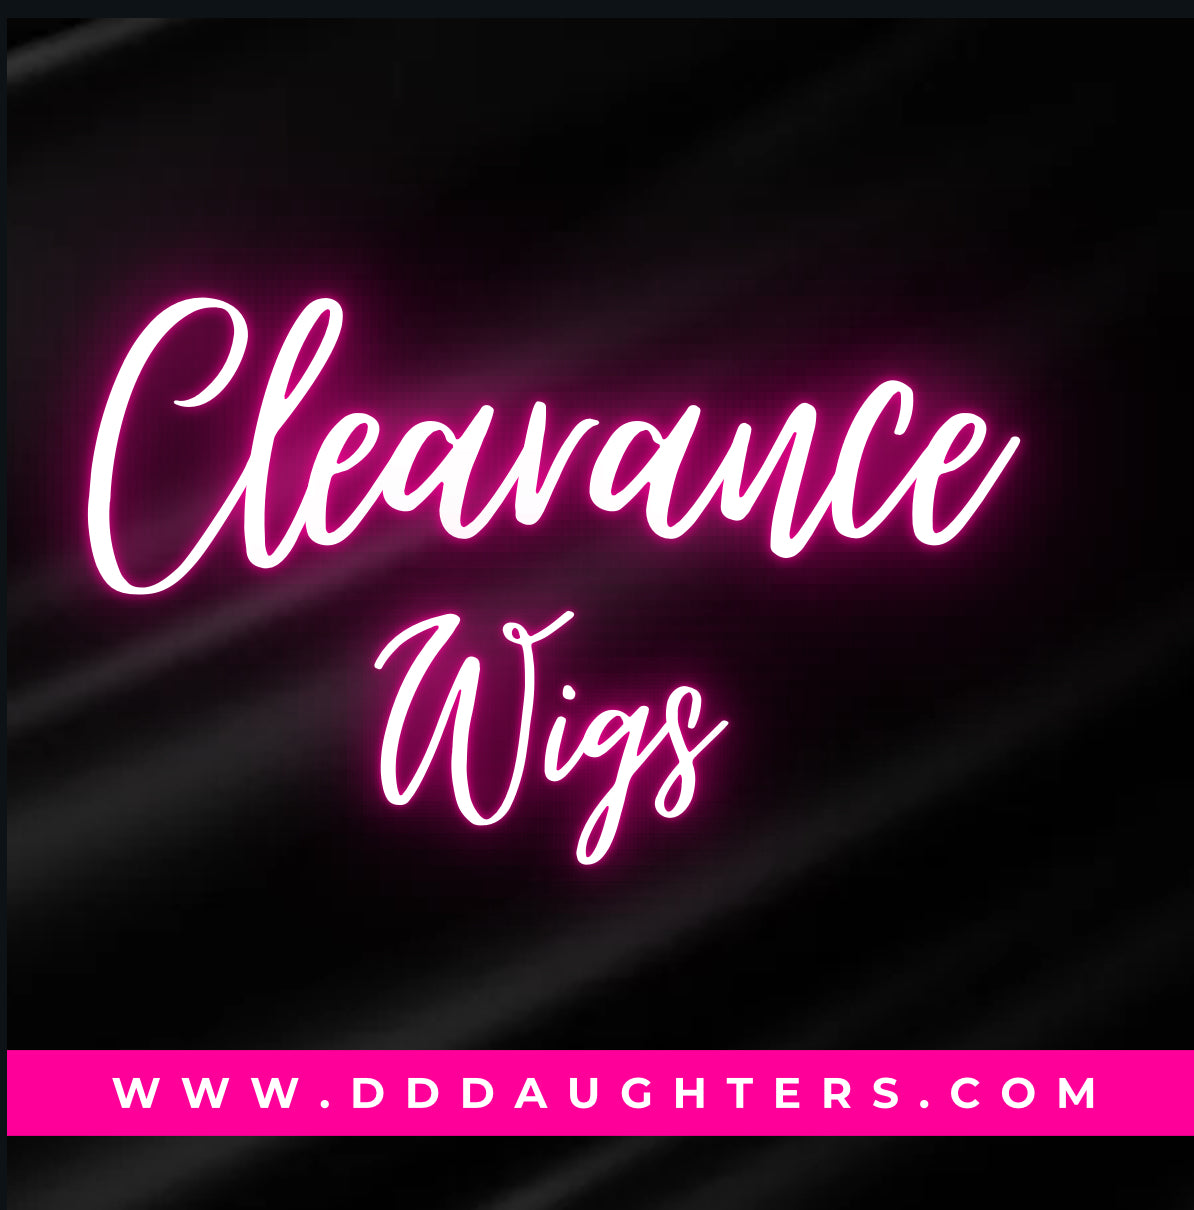 Clearance Wigs